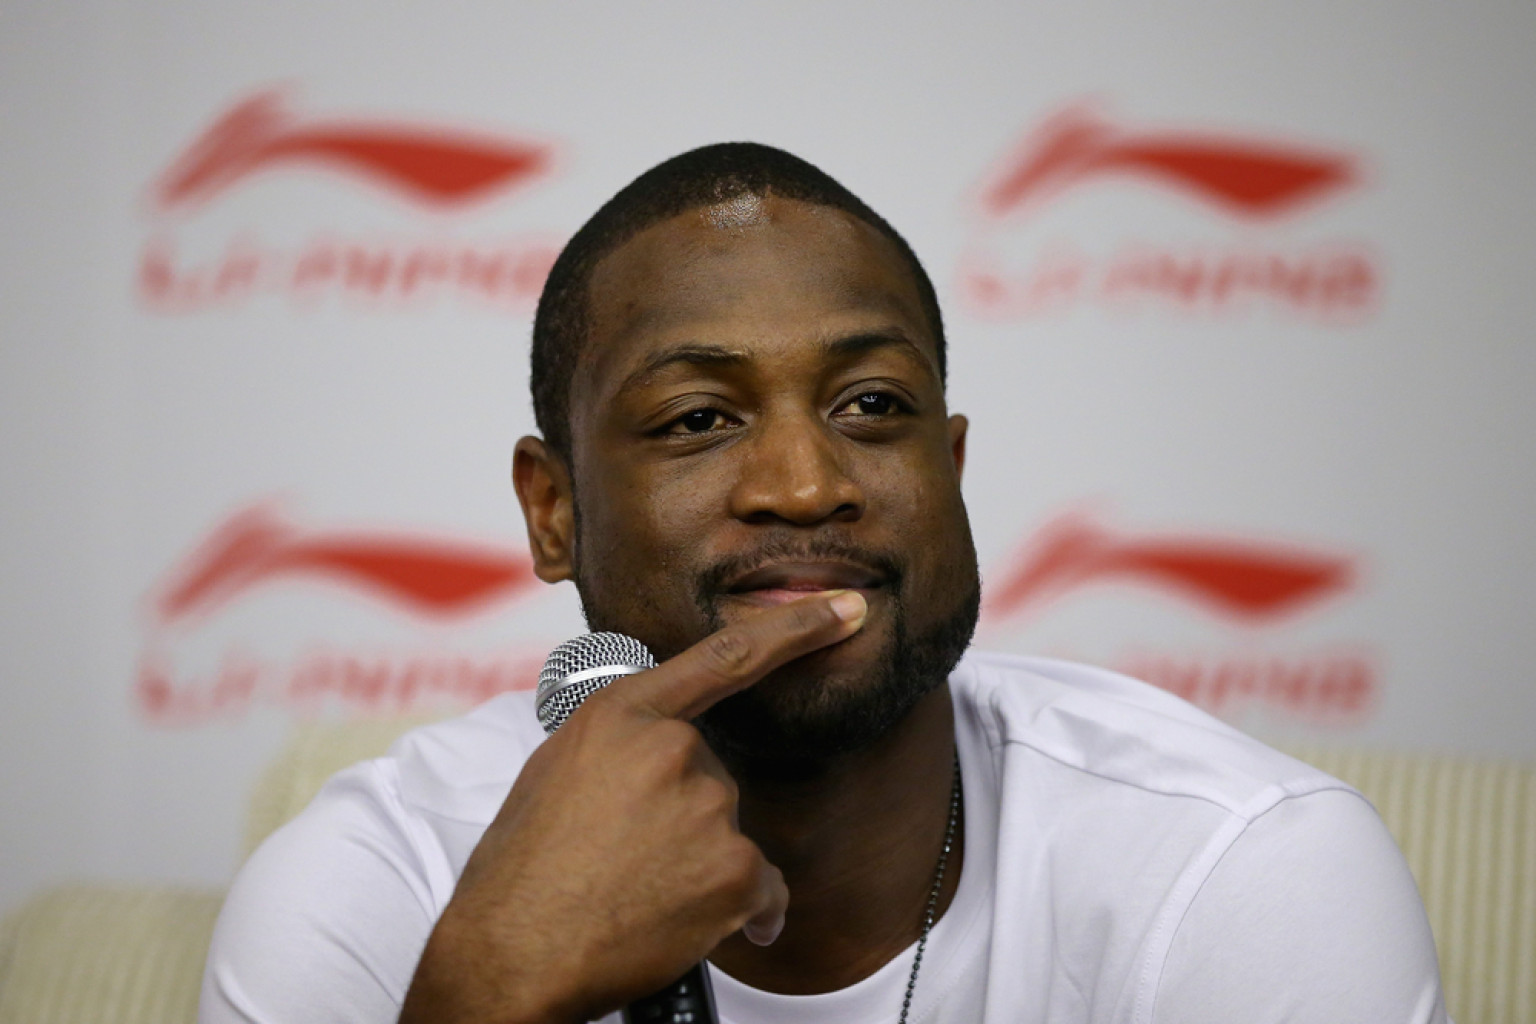 Dwyane Wade Reaches Divorce Settlement With Ex-Wife, Siohvaughn Funches1536 x 1024